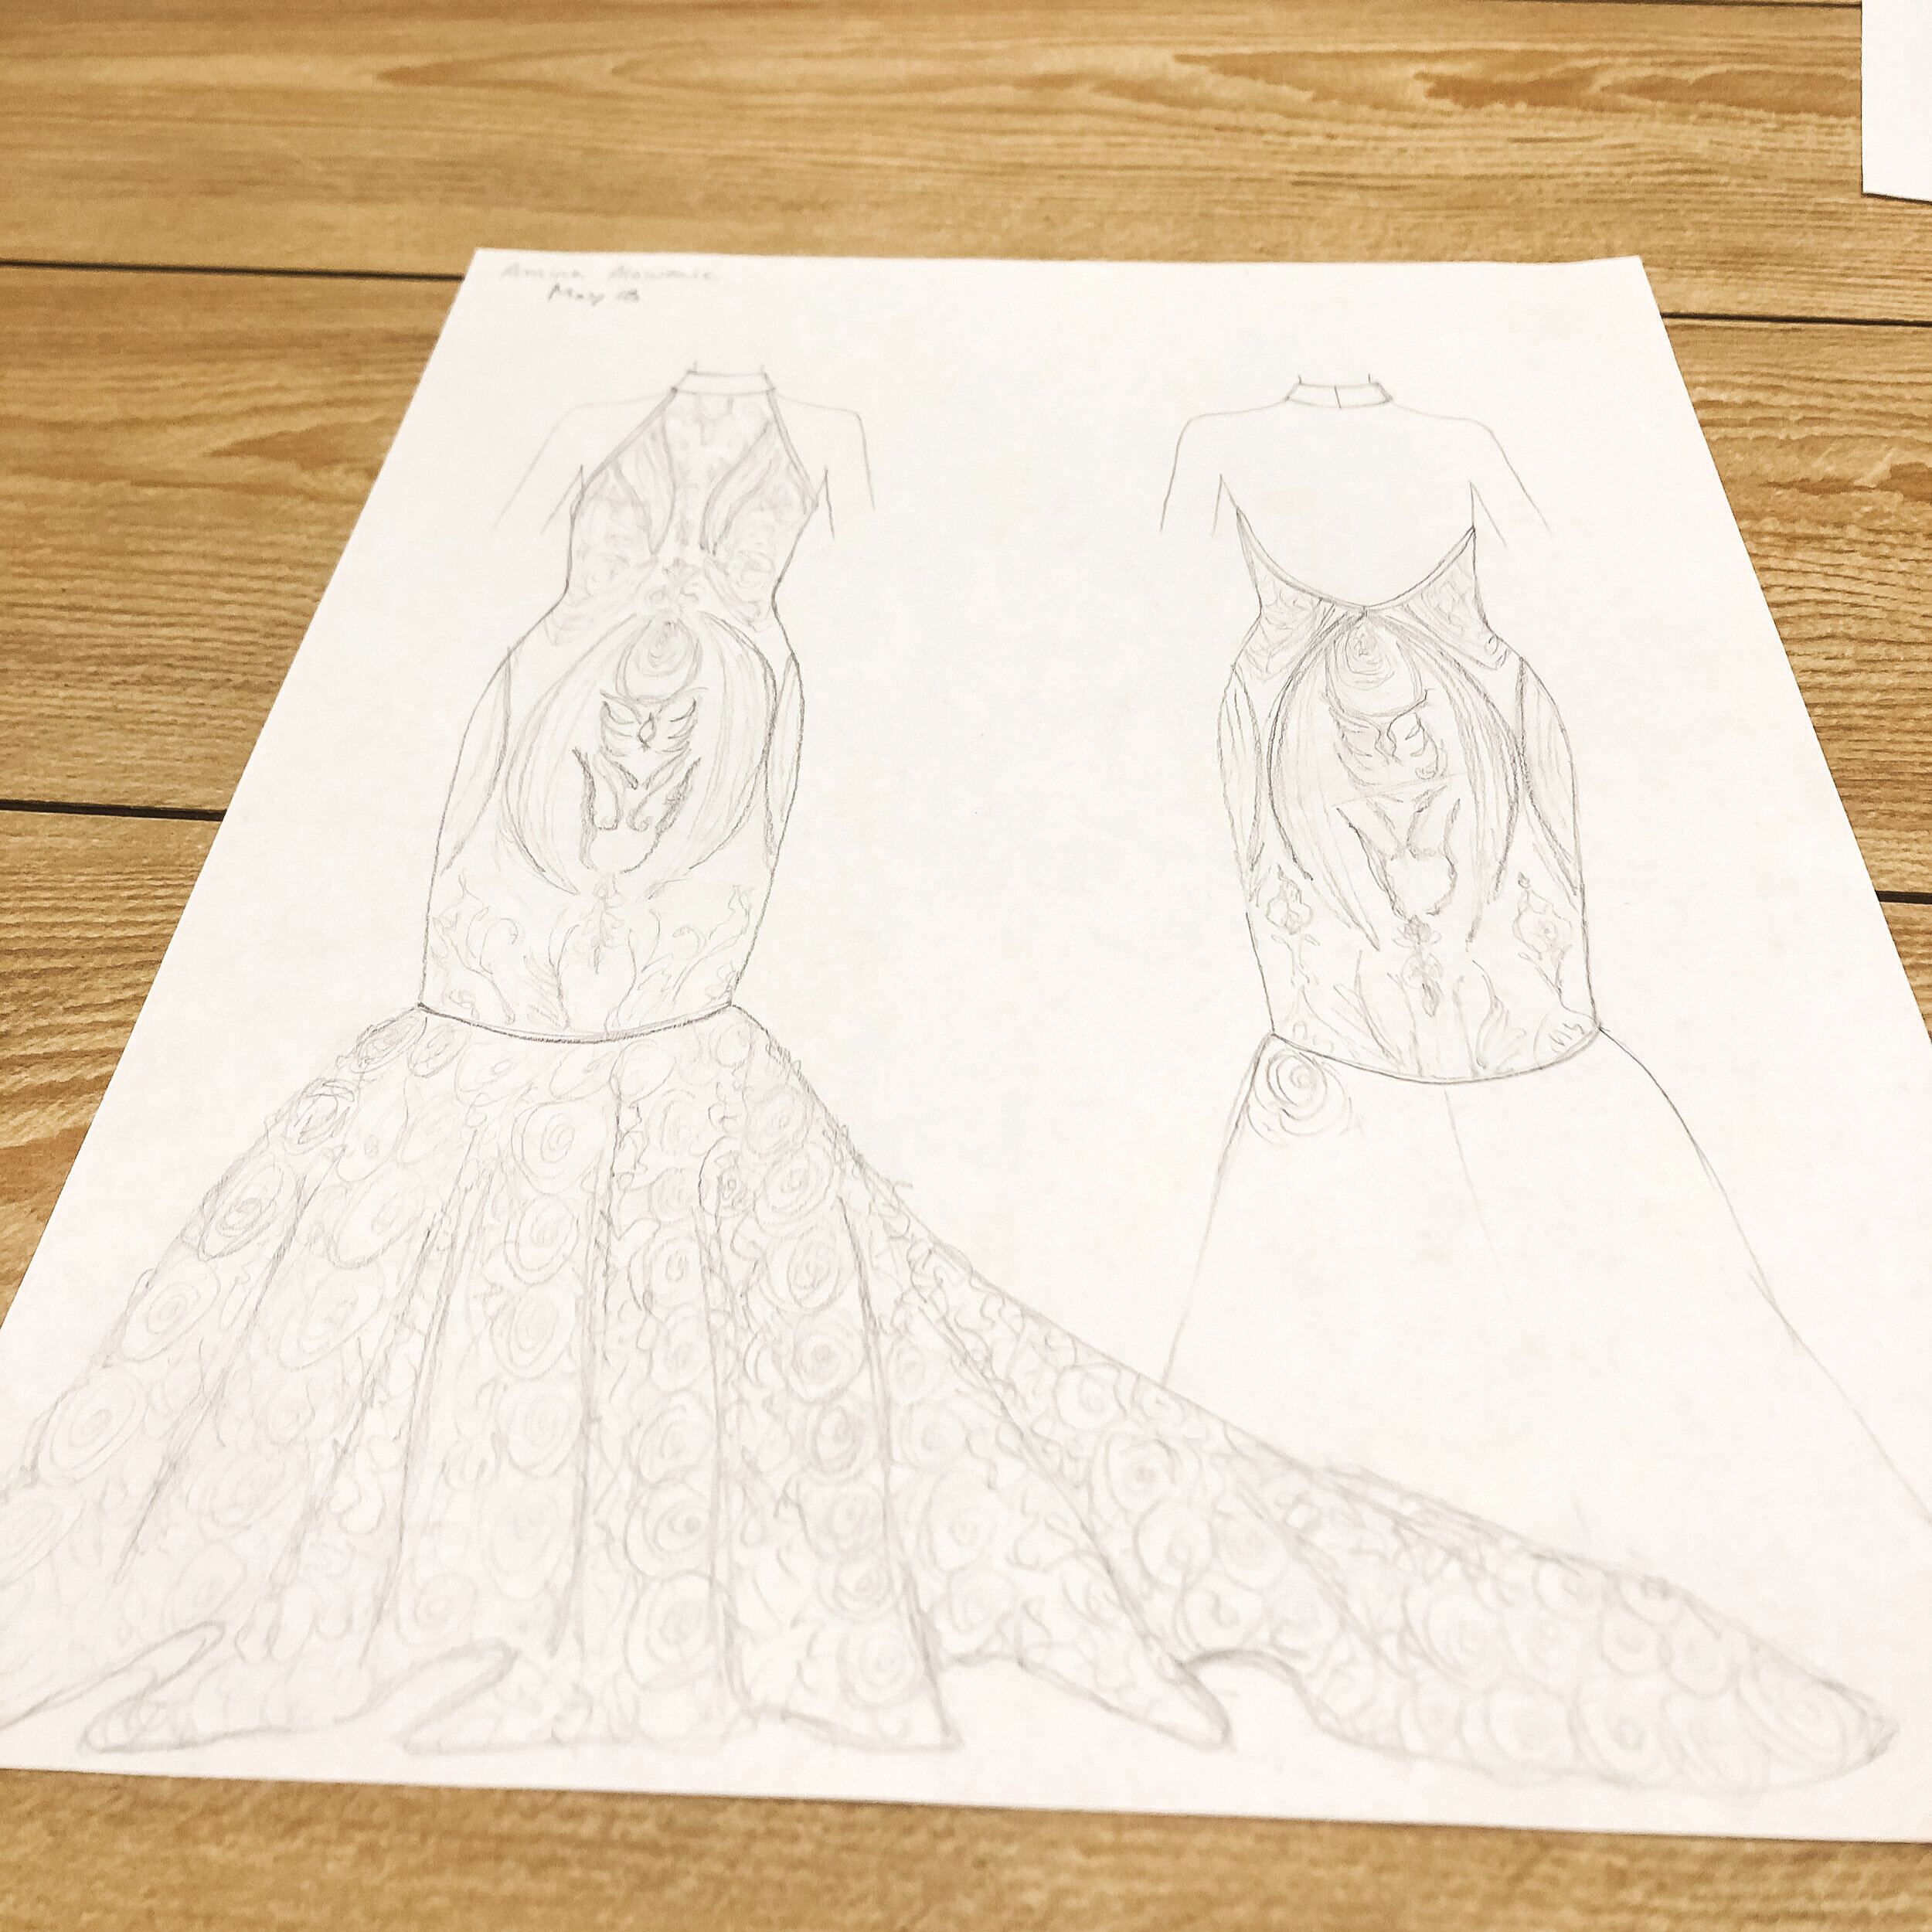 Prom dress Illustrations and Clip Art. 971 Prom dress royalty free  illustrations, drawings and graphics available to search from thousands of  vector EPS clipart producers.